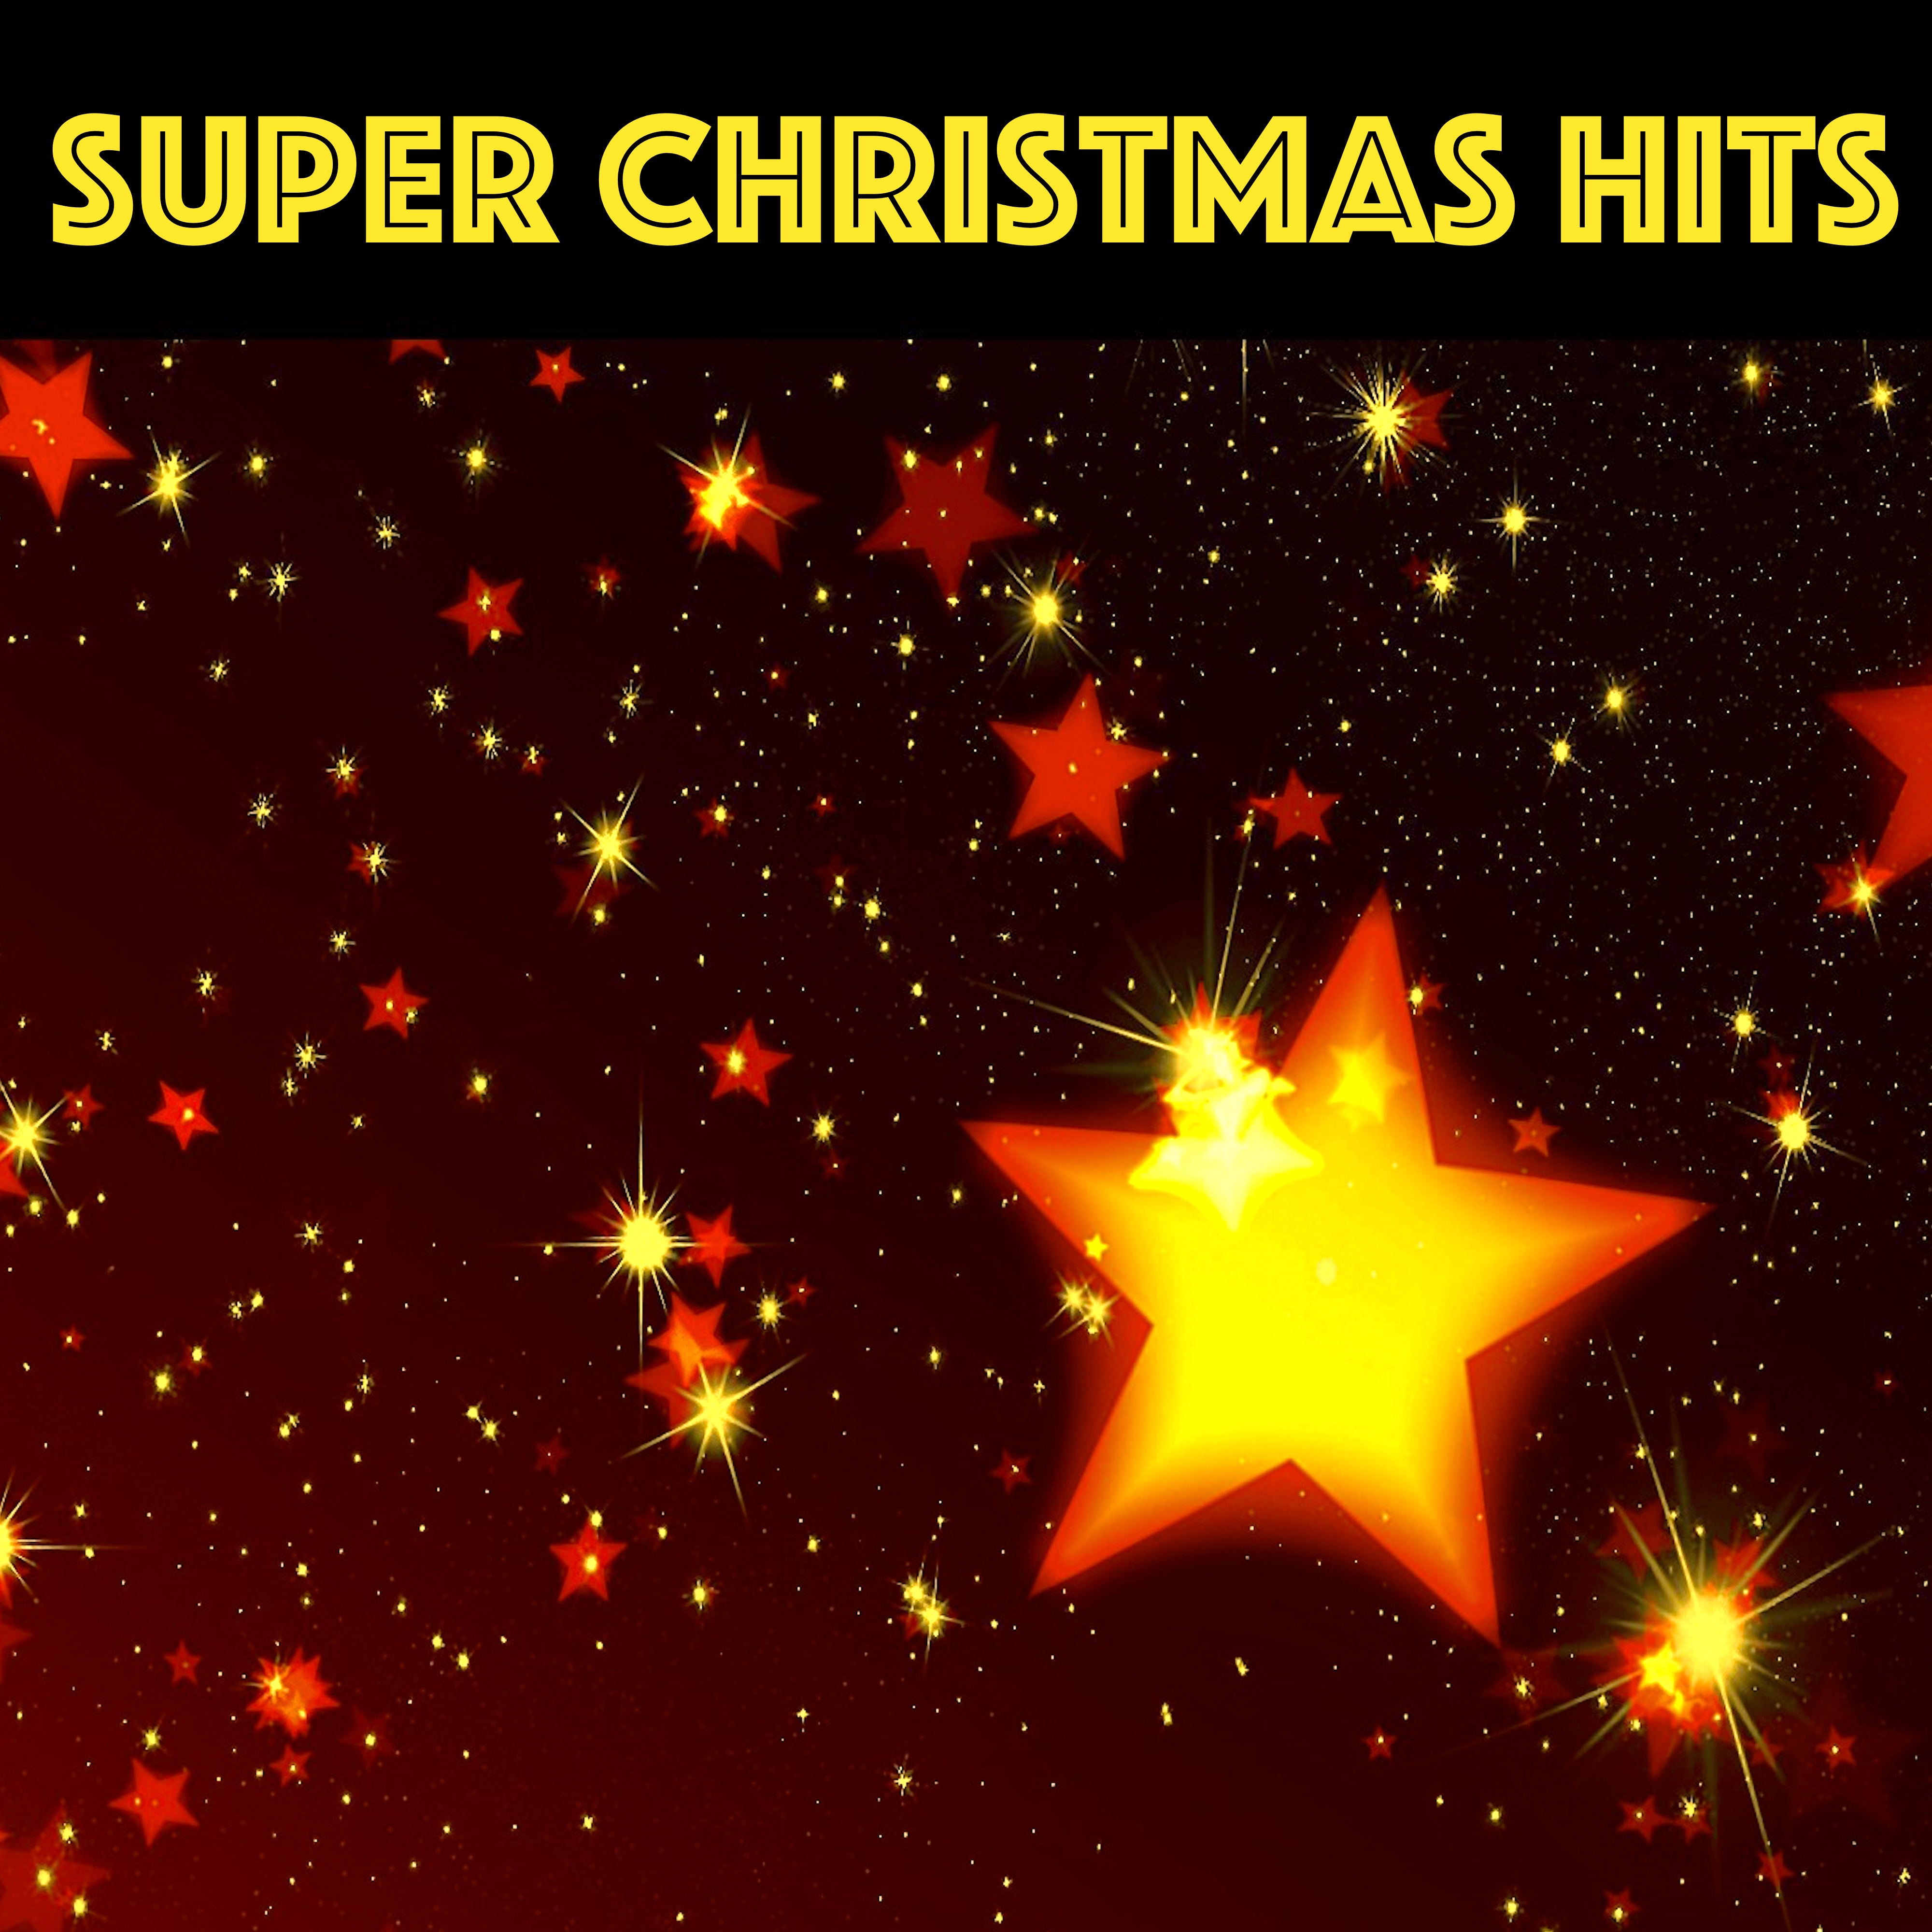 Super Christmas Hits  Best Playlist to Celebrate Christmas and New Year with Warmth and Happiness